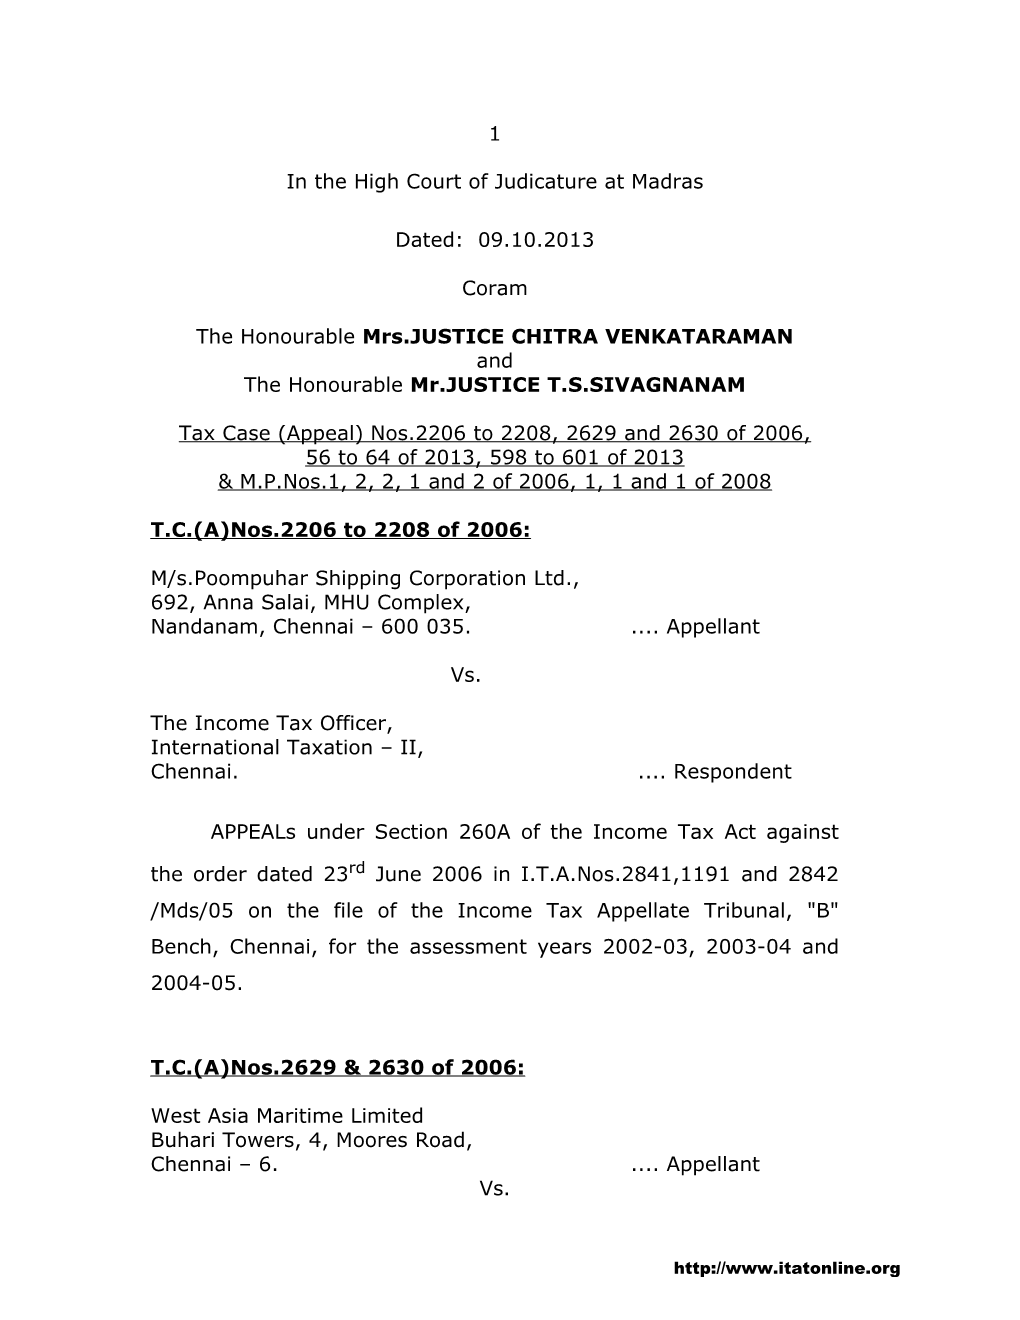 1 in the High Court of Judicature at Madras Dated